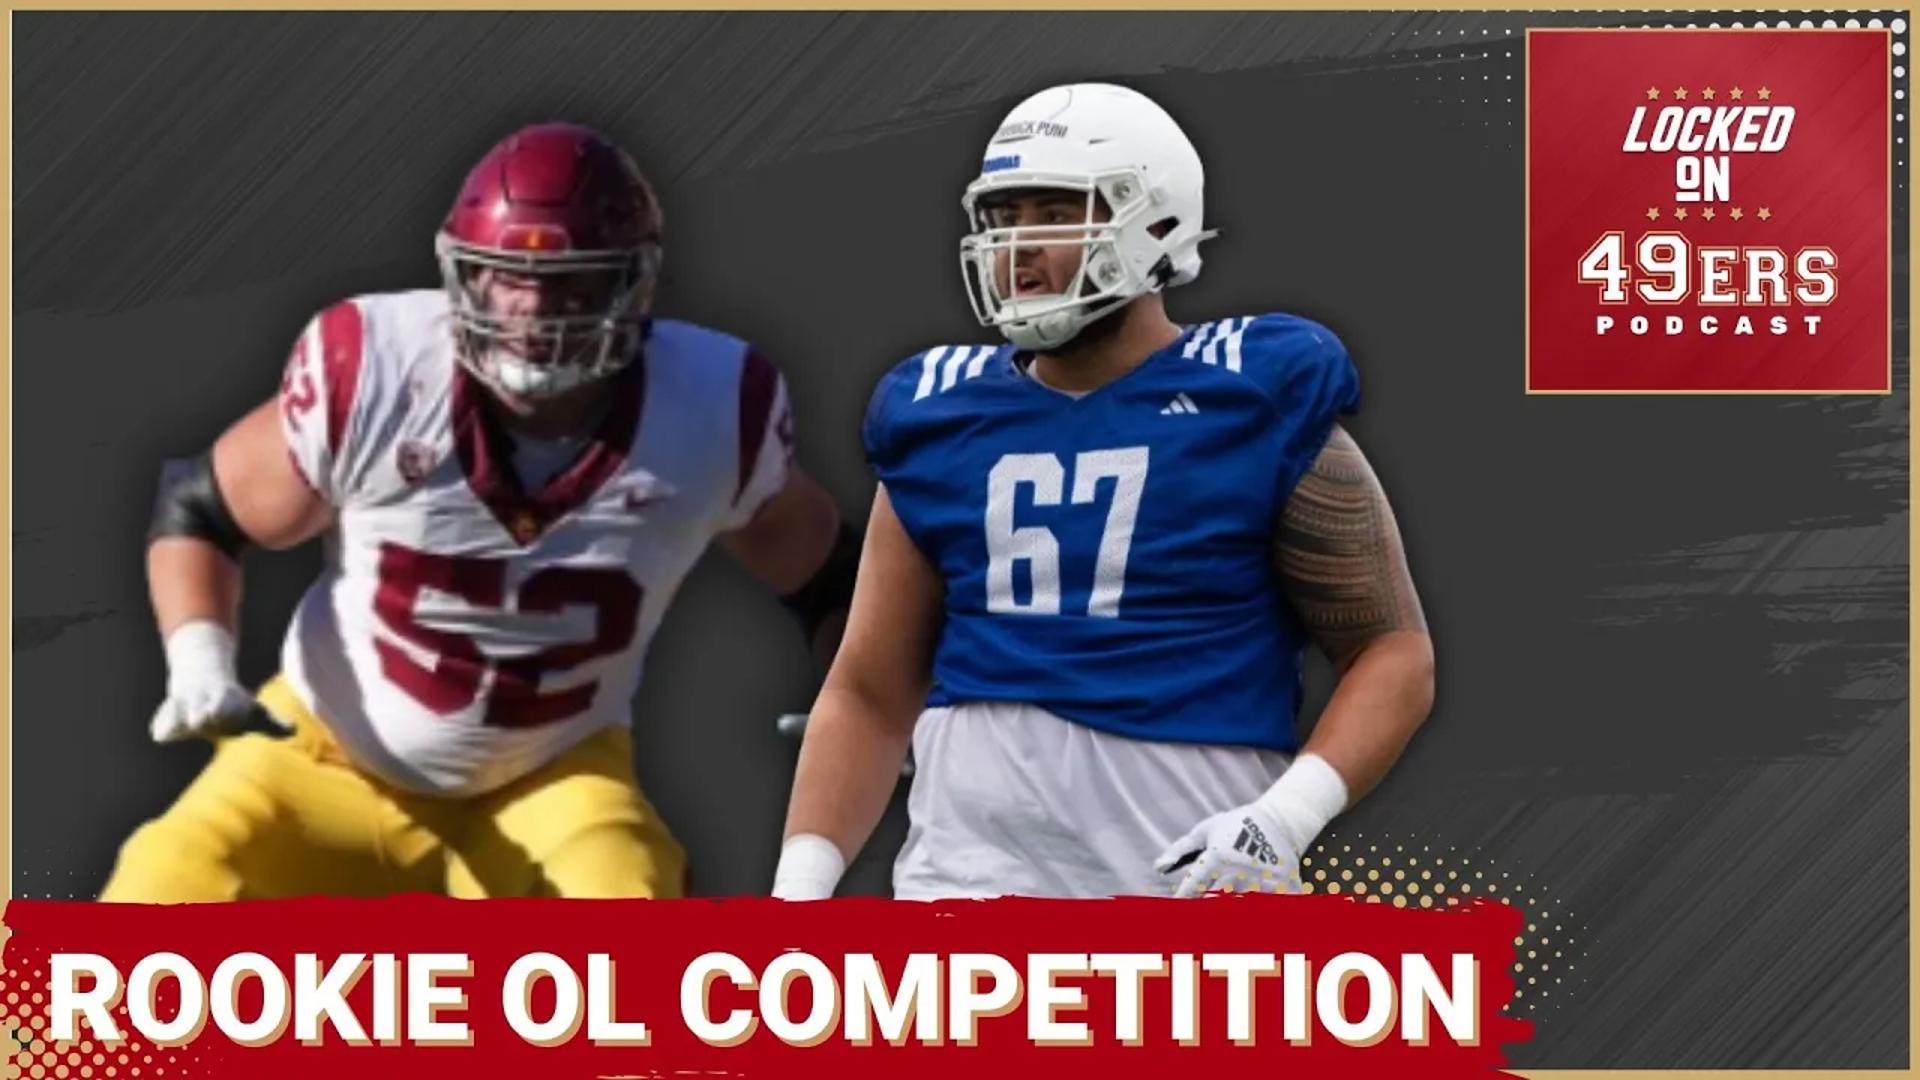 The San Francisco 49ers drafted a pair of offensive linemen in third rounder Dominick Puni out of Kansas and USC's Jarrett Kingston in round six